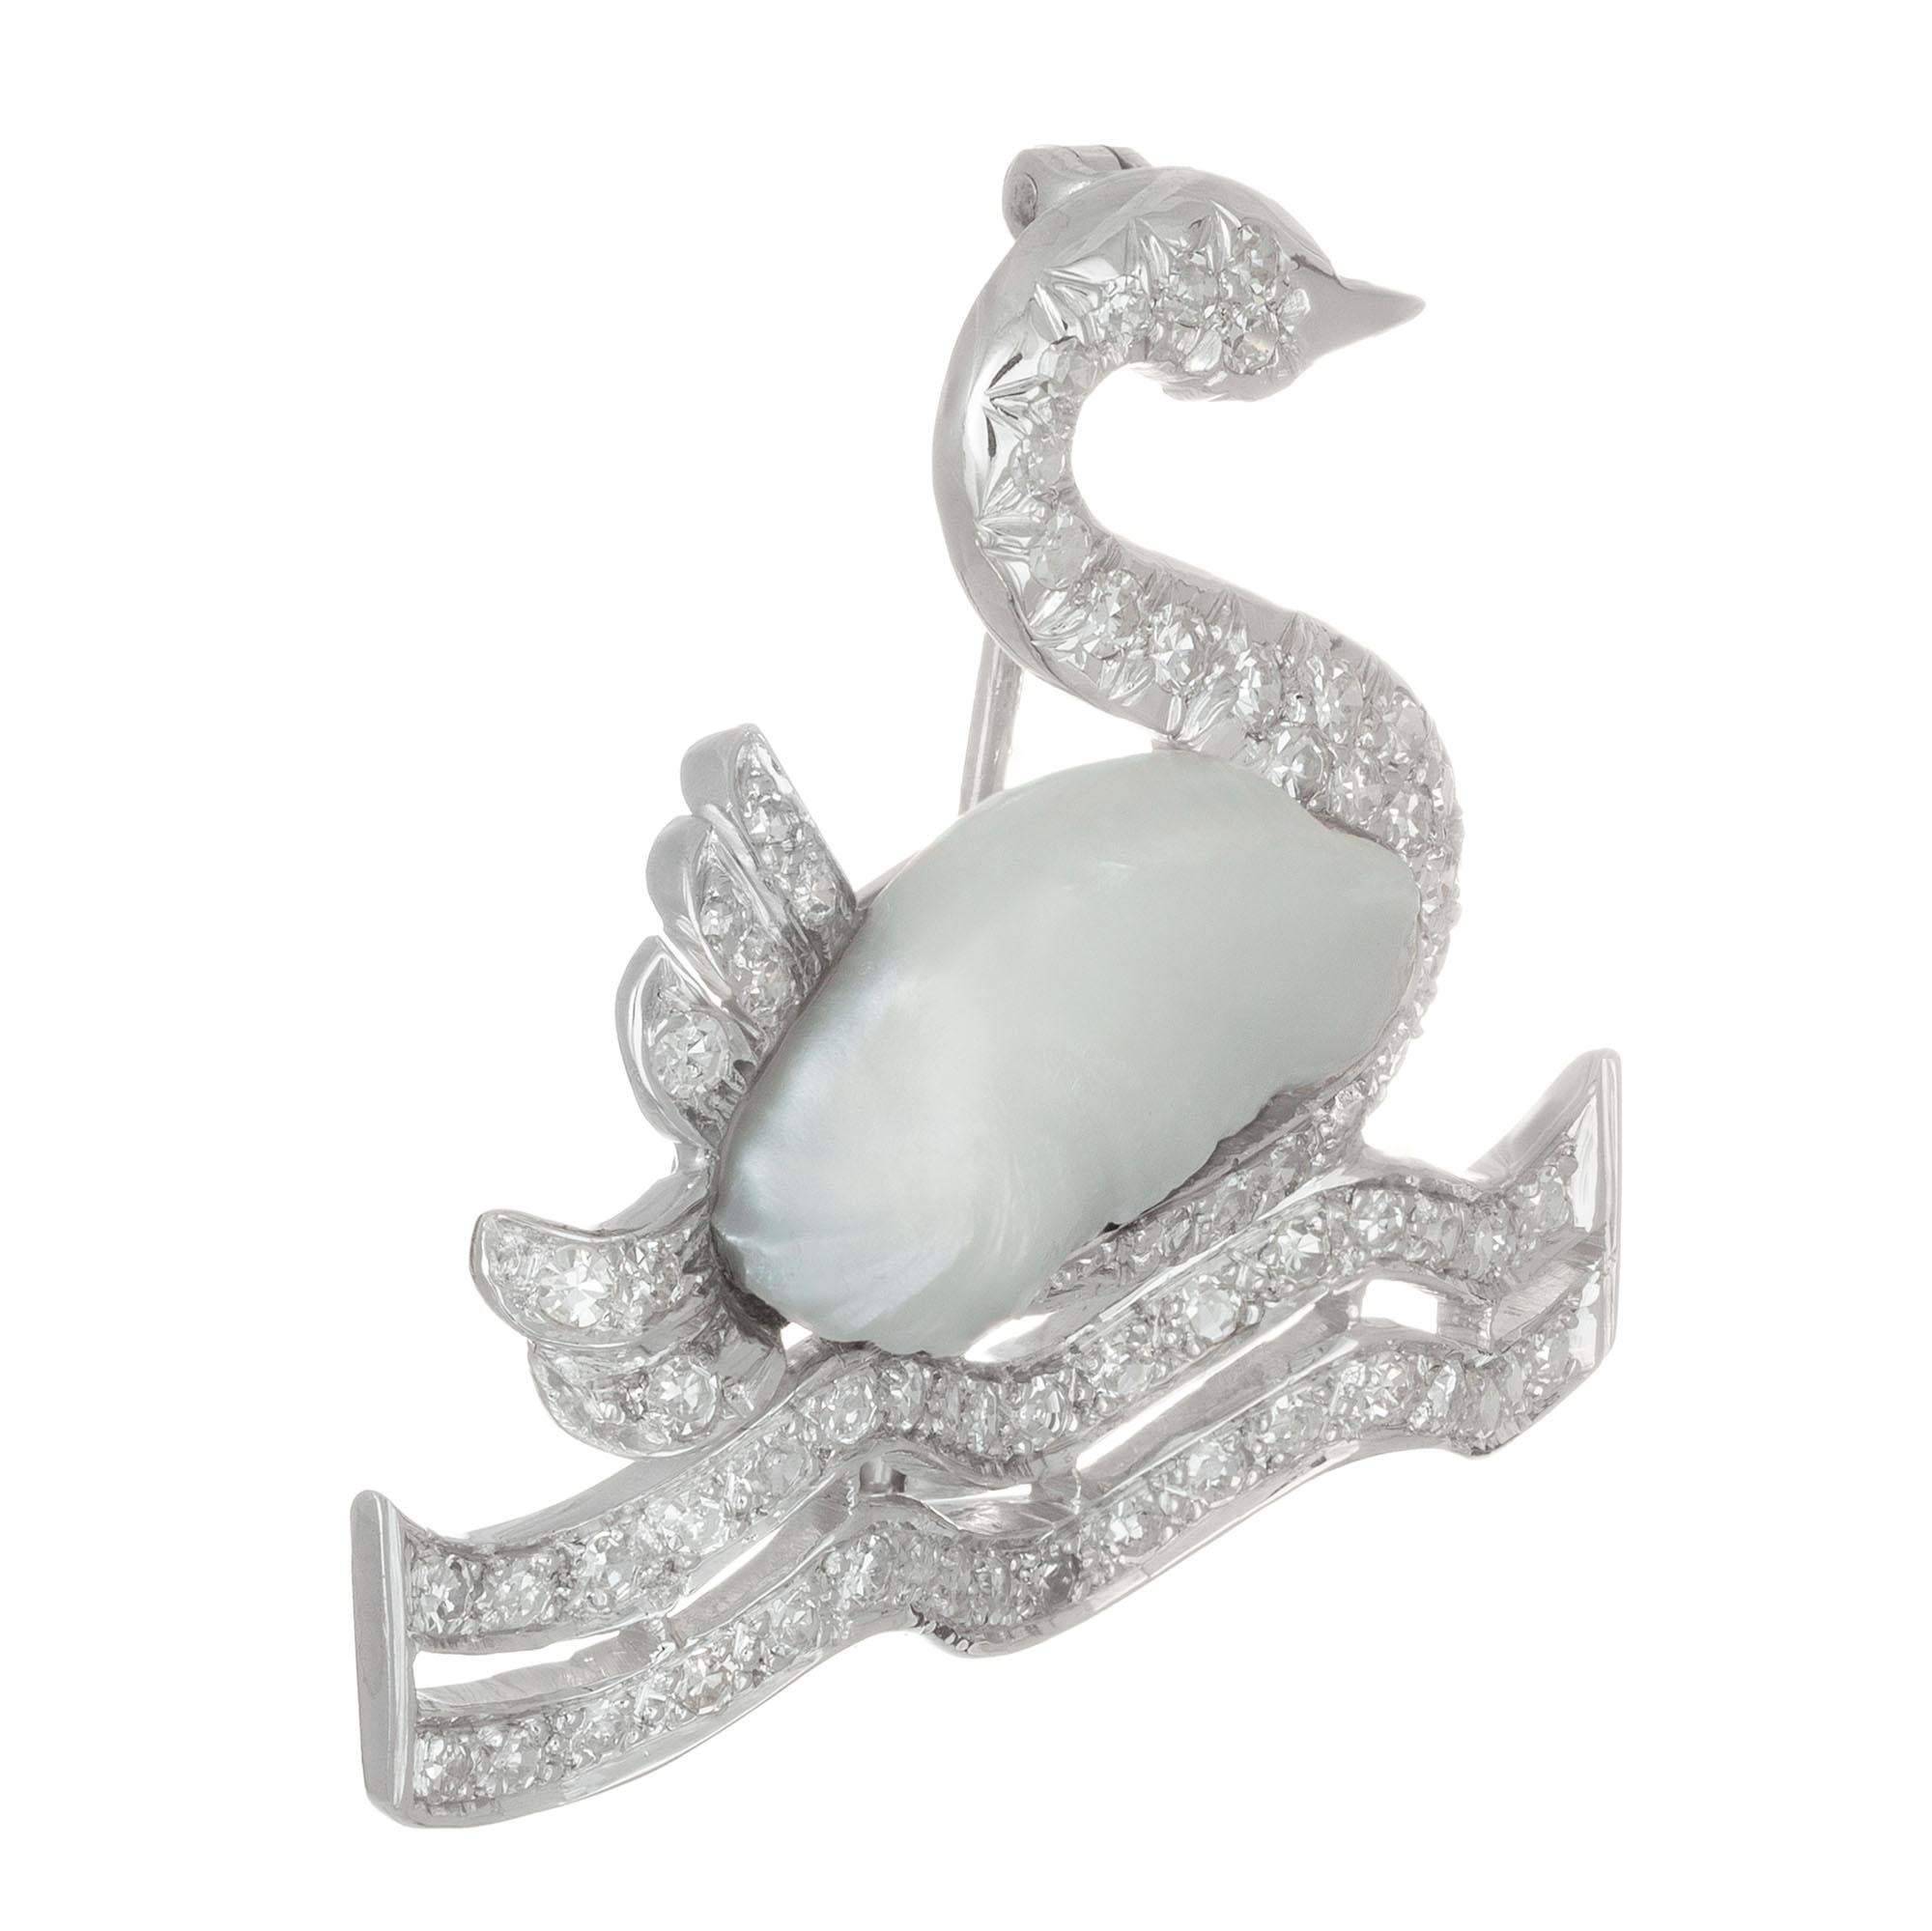 Mid-Century natural freshwater pearl and pave diamond Swan brooch in 14k white gold.

1 freshwater white grayish pearl 16.9 x 8mm
67 single cut diamond H-J SI-I, approx. .75ct
14k white gold 
5.9 grams
Top to bottom: 28.56 or 1 1/8 Inch
Width: